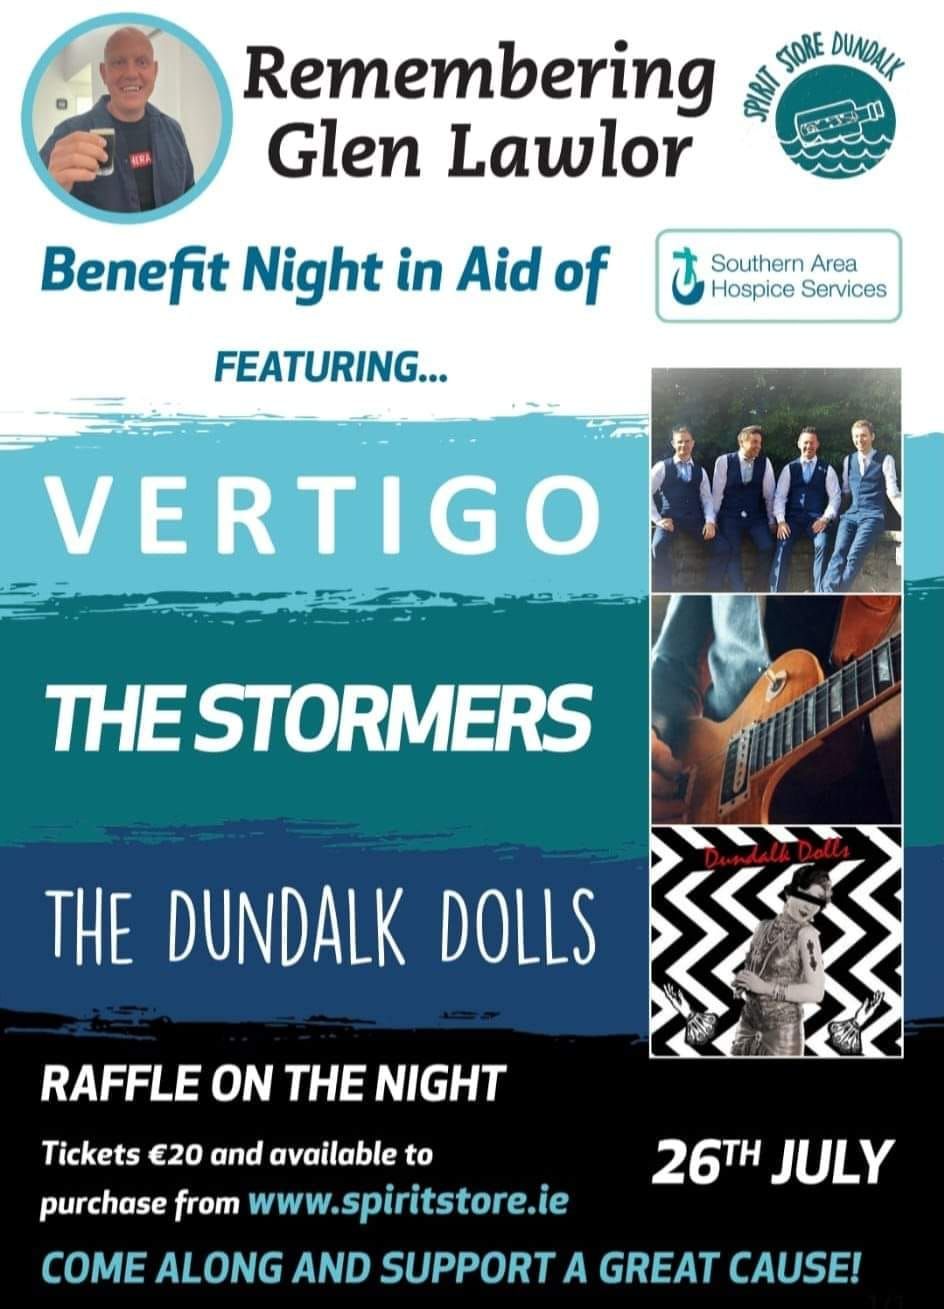 Remembering Glen Lawlor\nfeaturing The Stormers, Vertigo, The Dundalk Dolls\n\nFriday 26th July